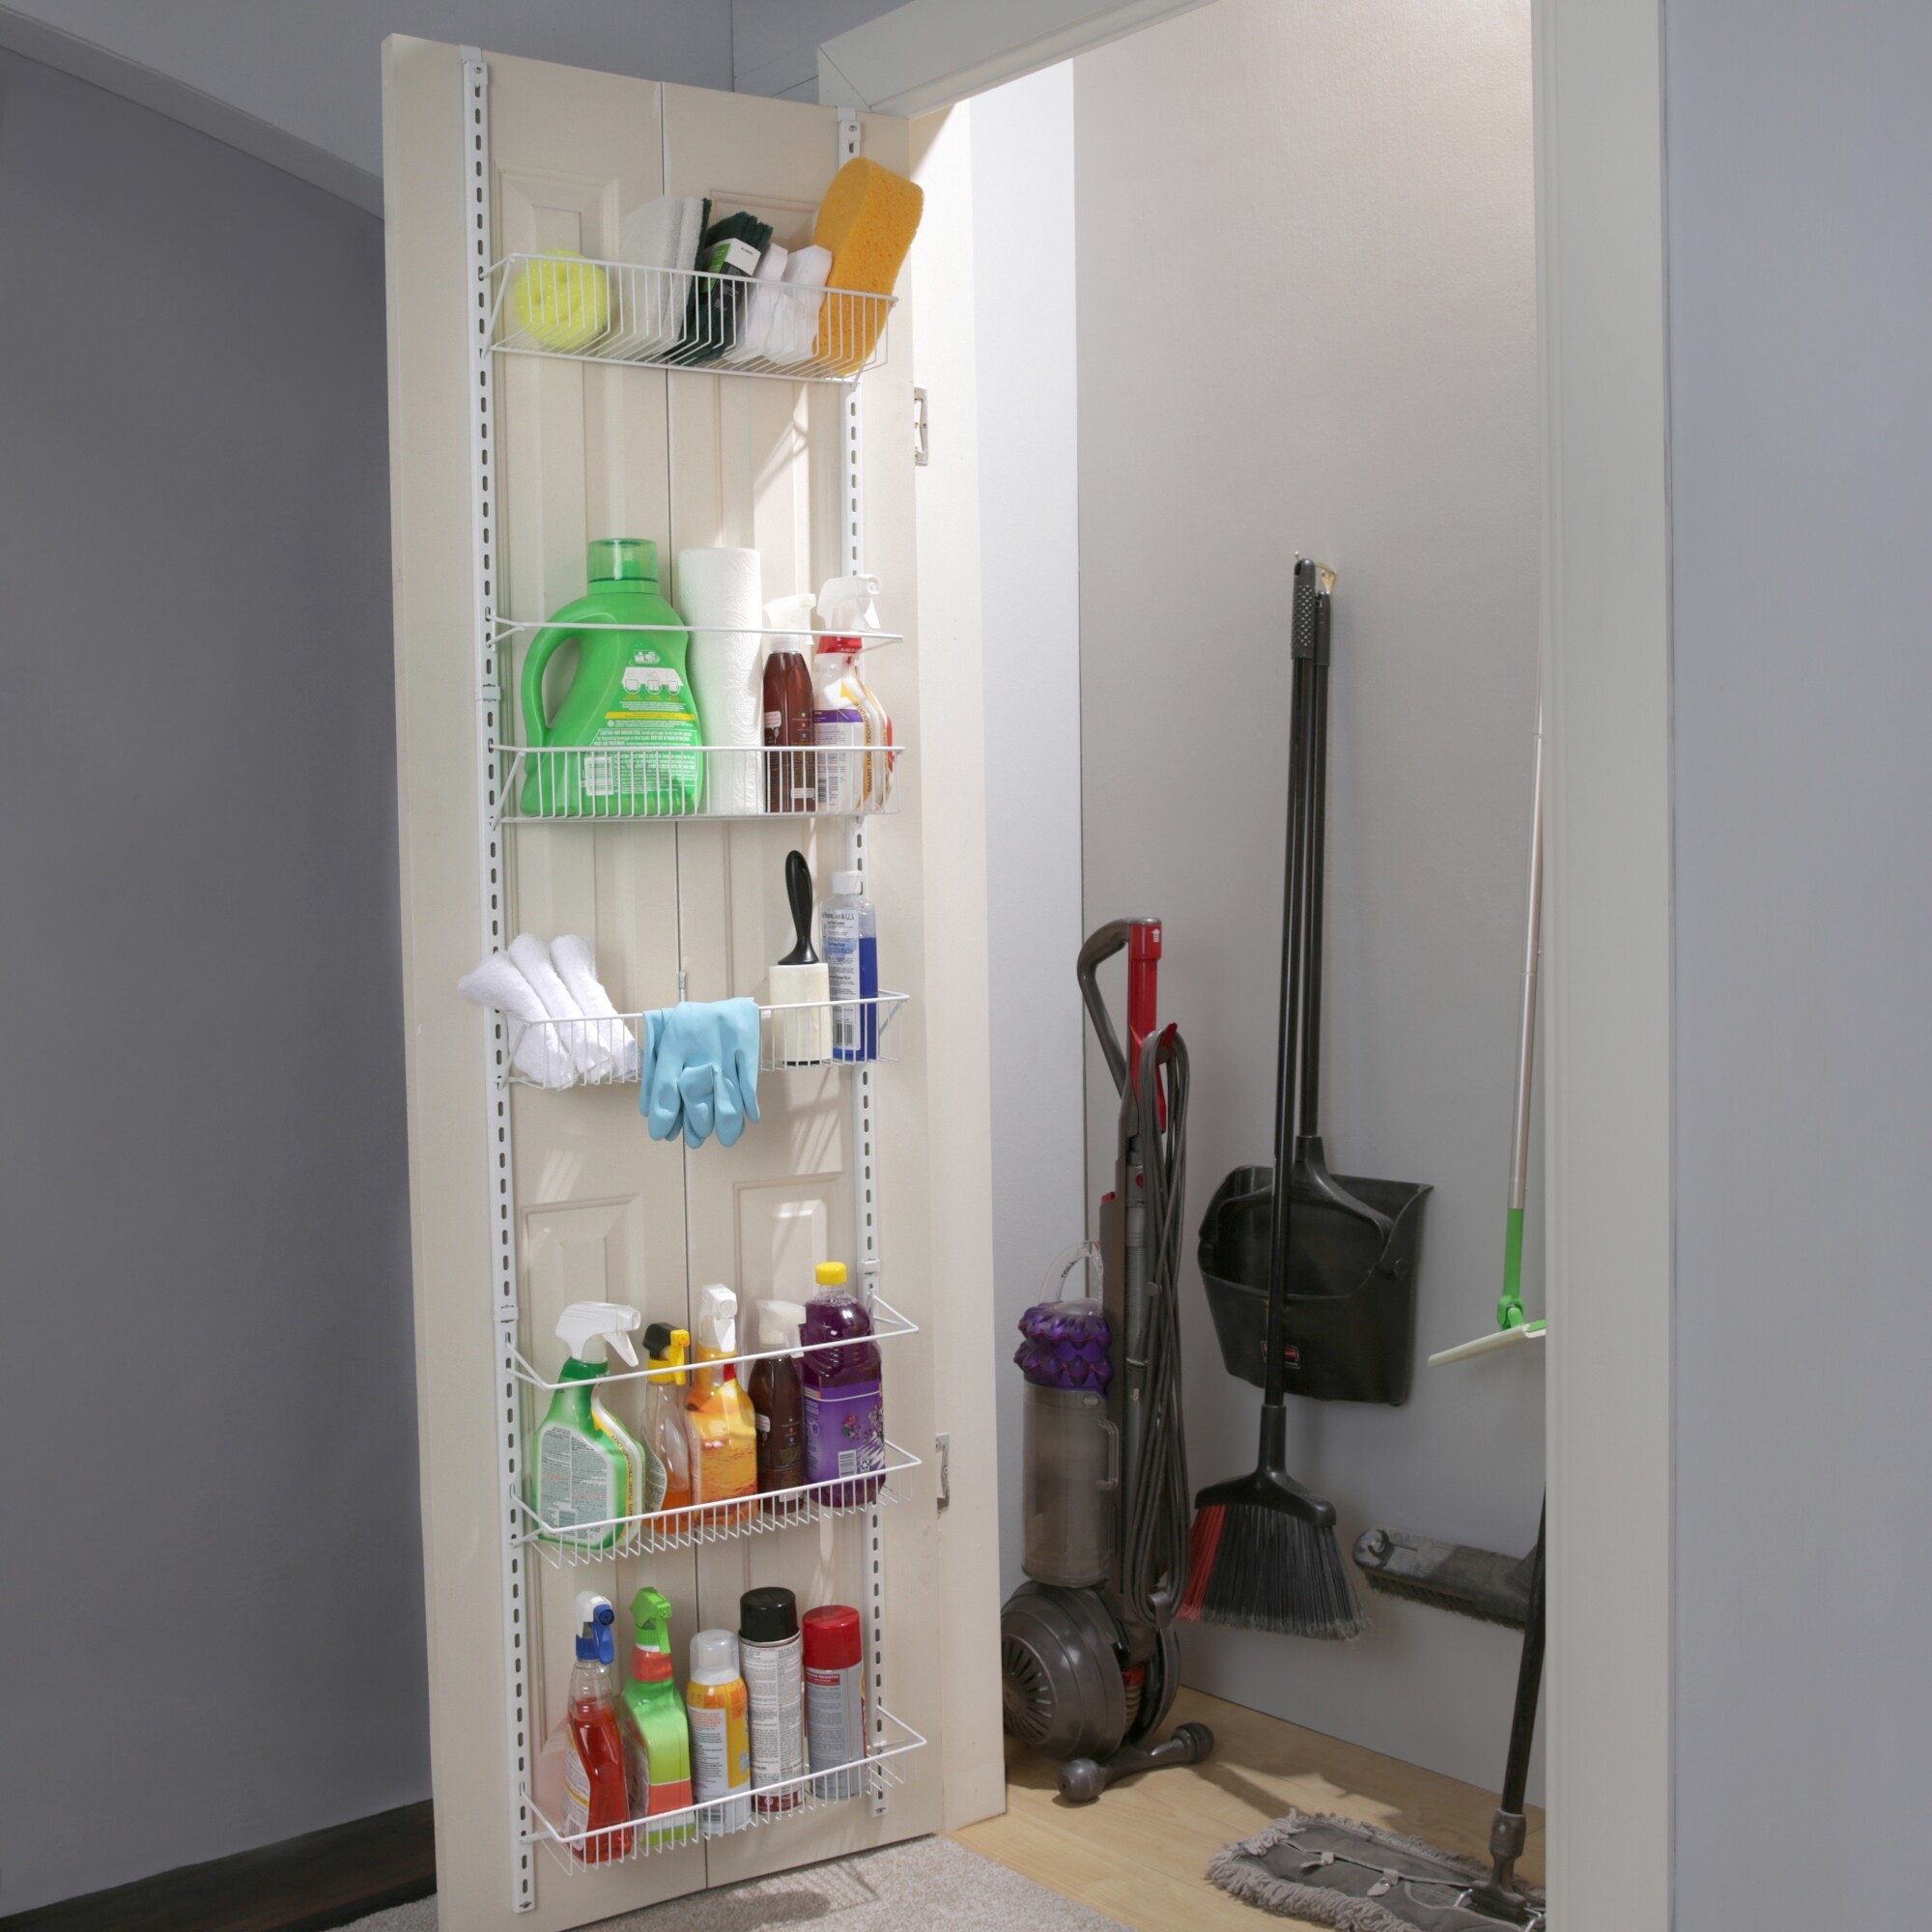 An eight-tier corner shelf that can be hung over the door to store items